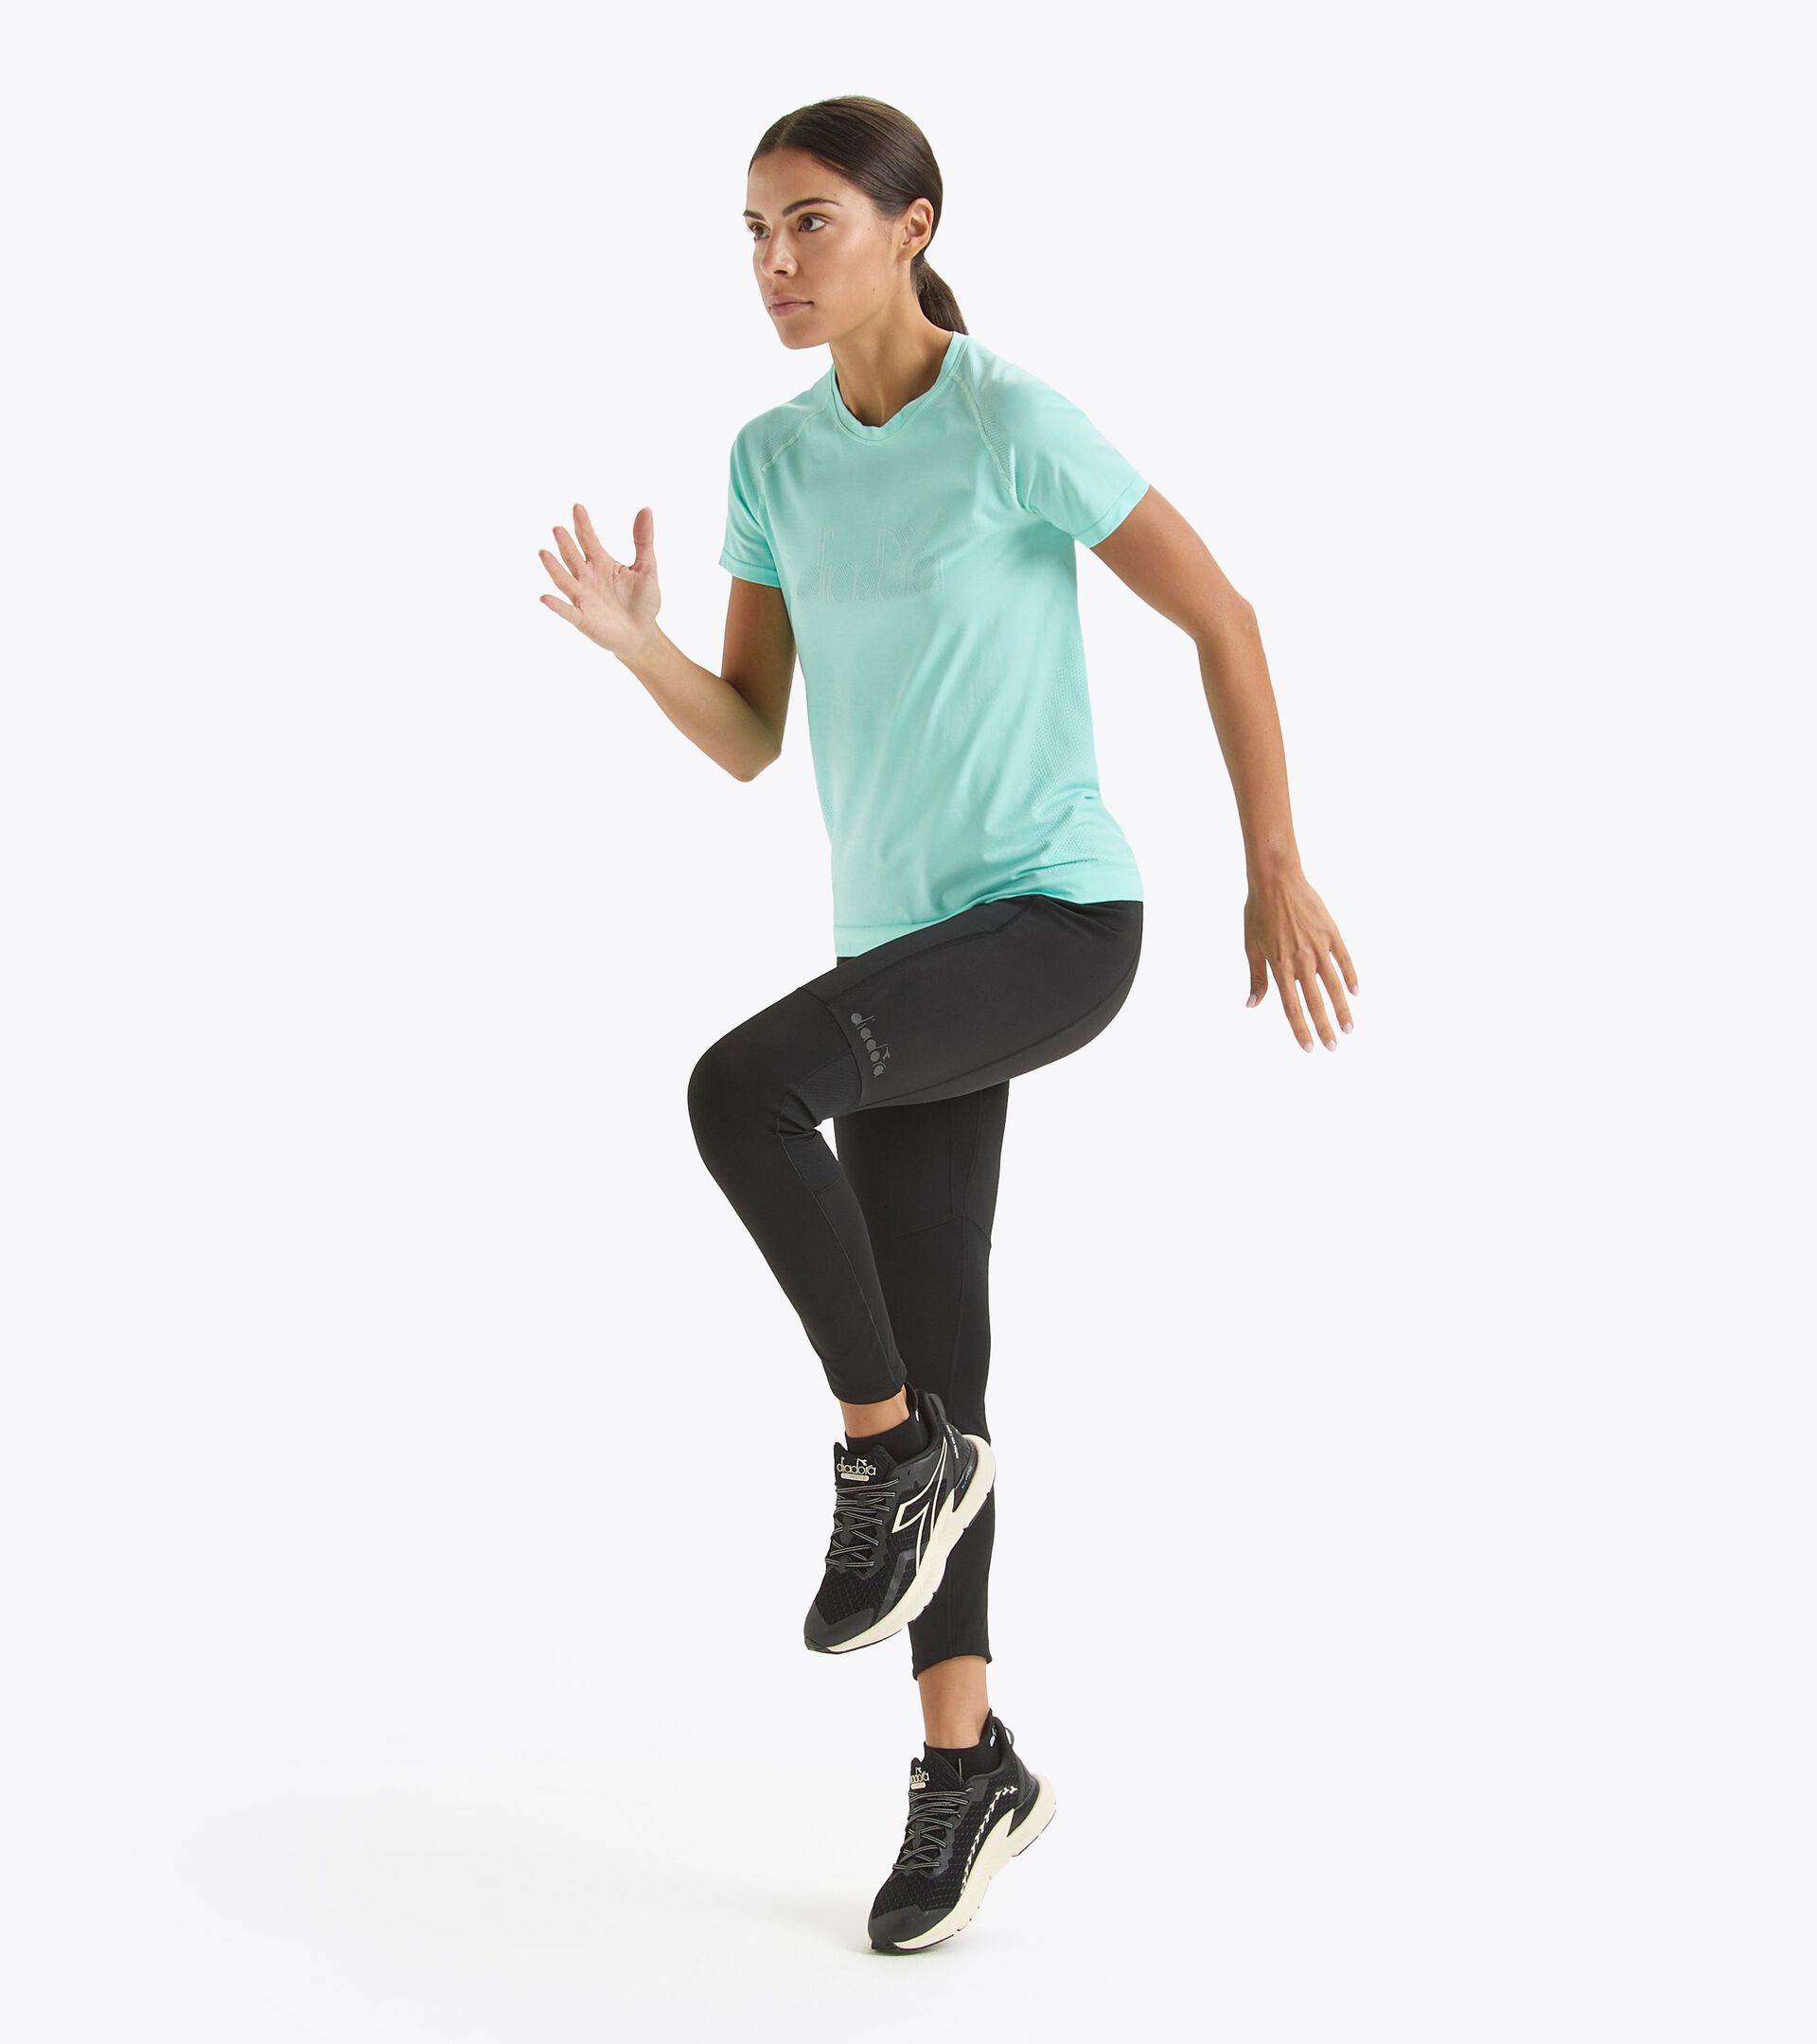 Explore our Selection of Running Leggings & Tights